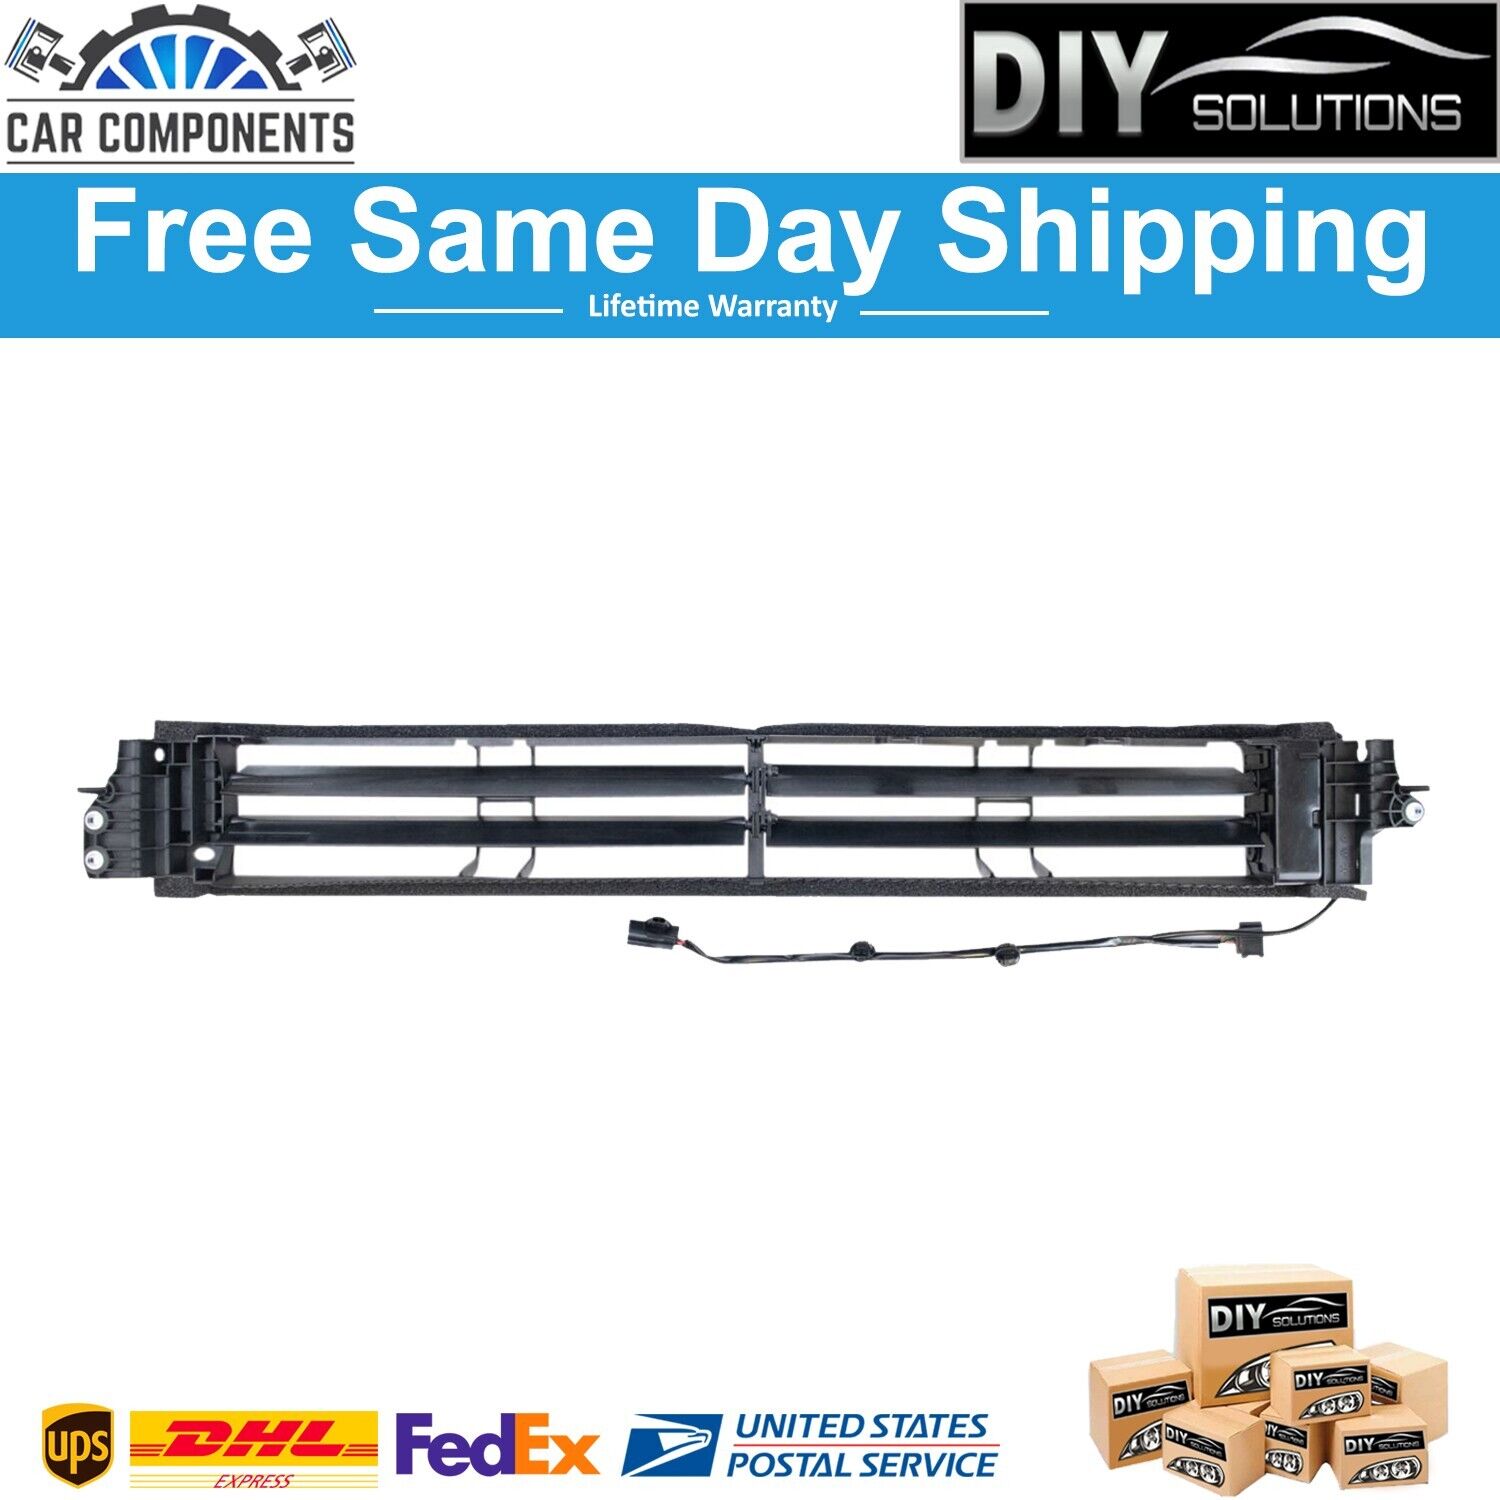 New DIY Solutions Active Grille Shutter Fits For 2019-2021 Toyota Corolla Prius